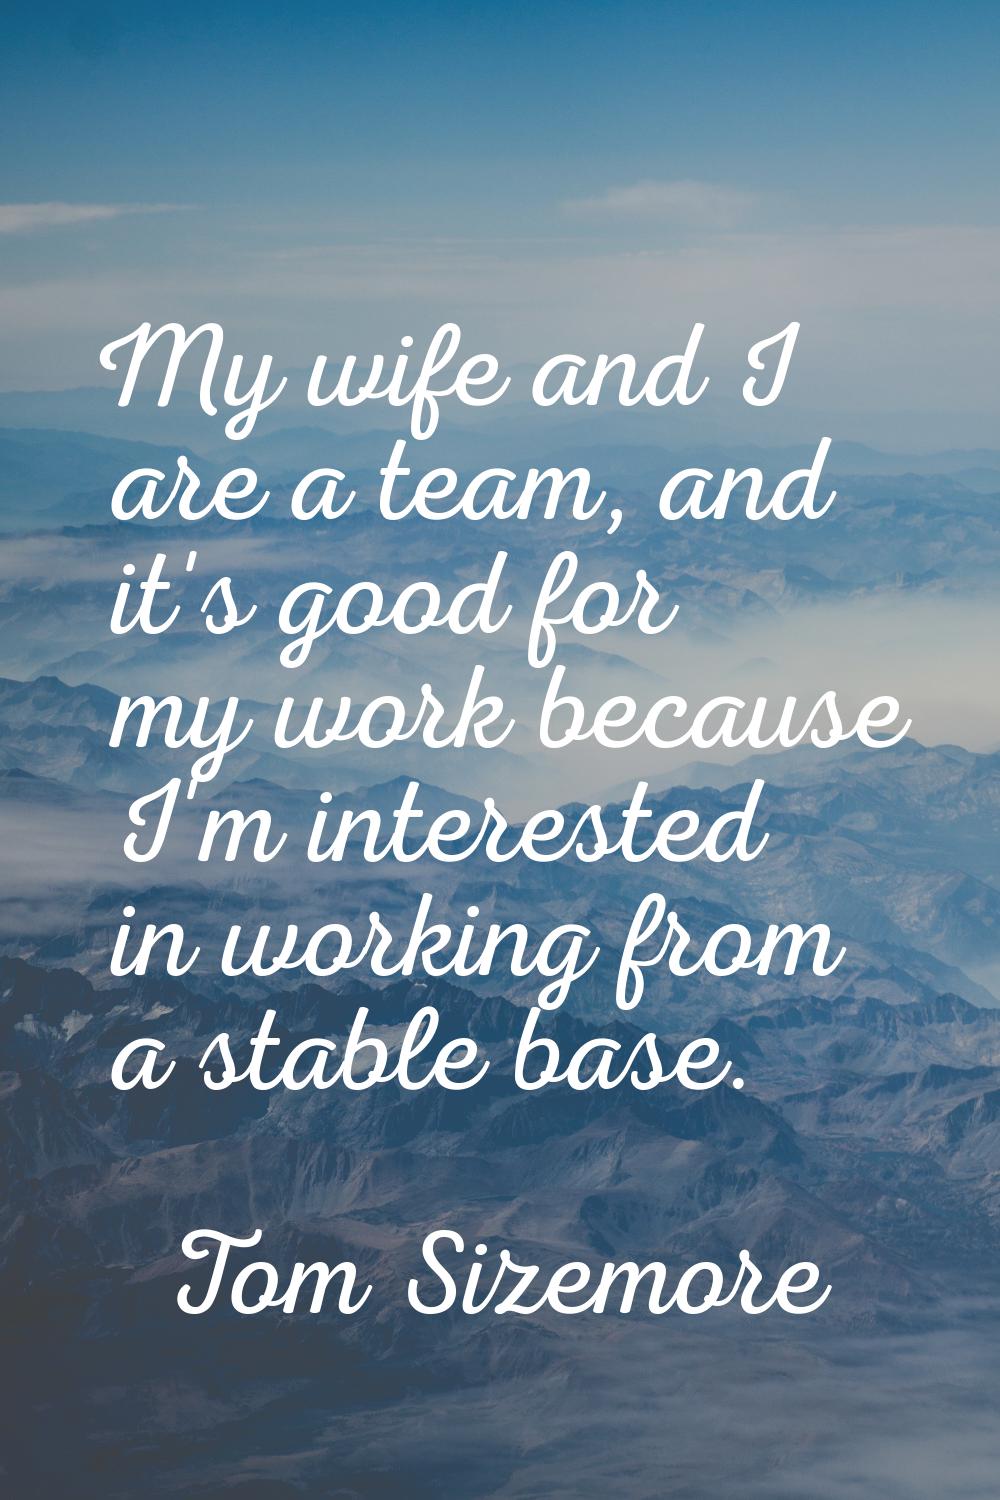 My wife and I are a team, and it's good for my work because I'm interested in working from a stable